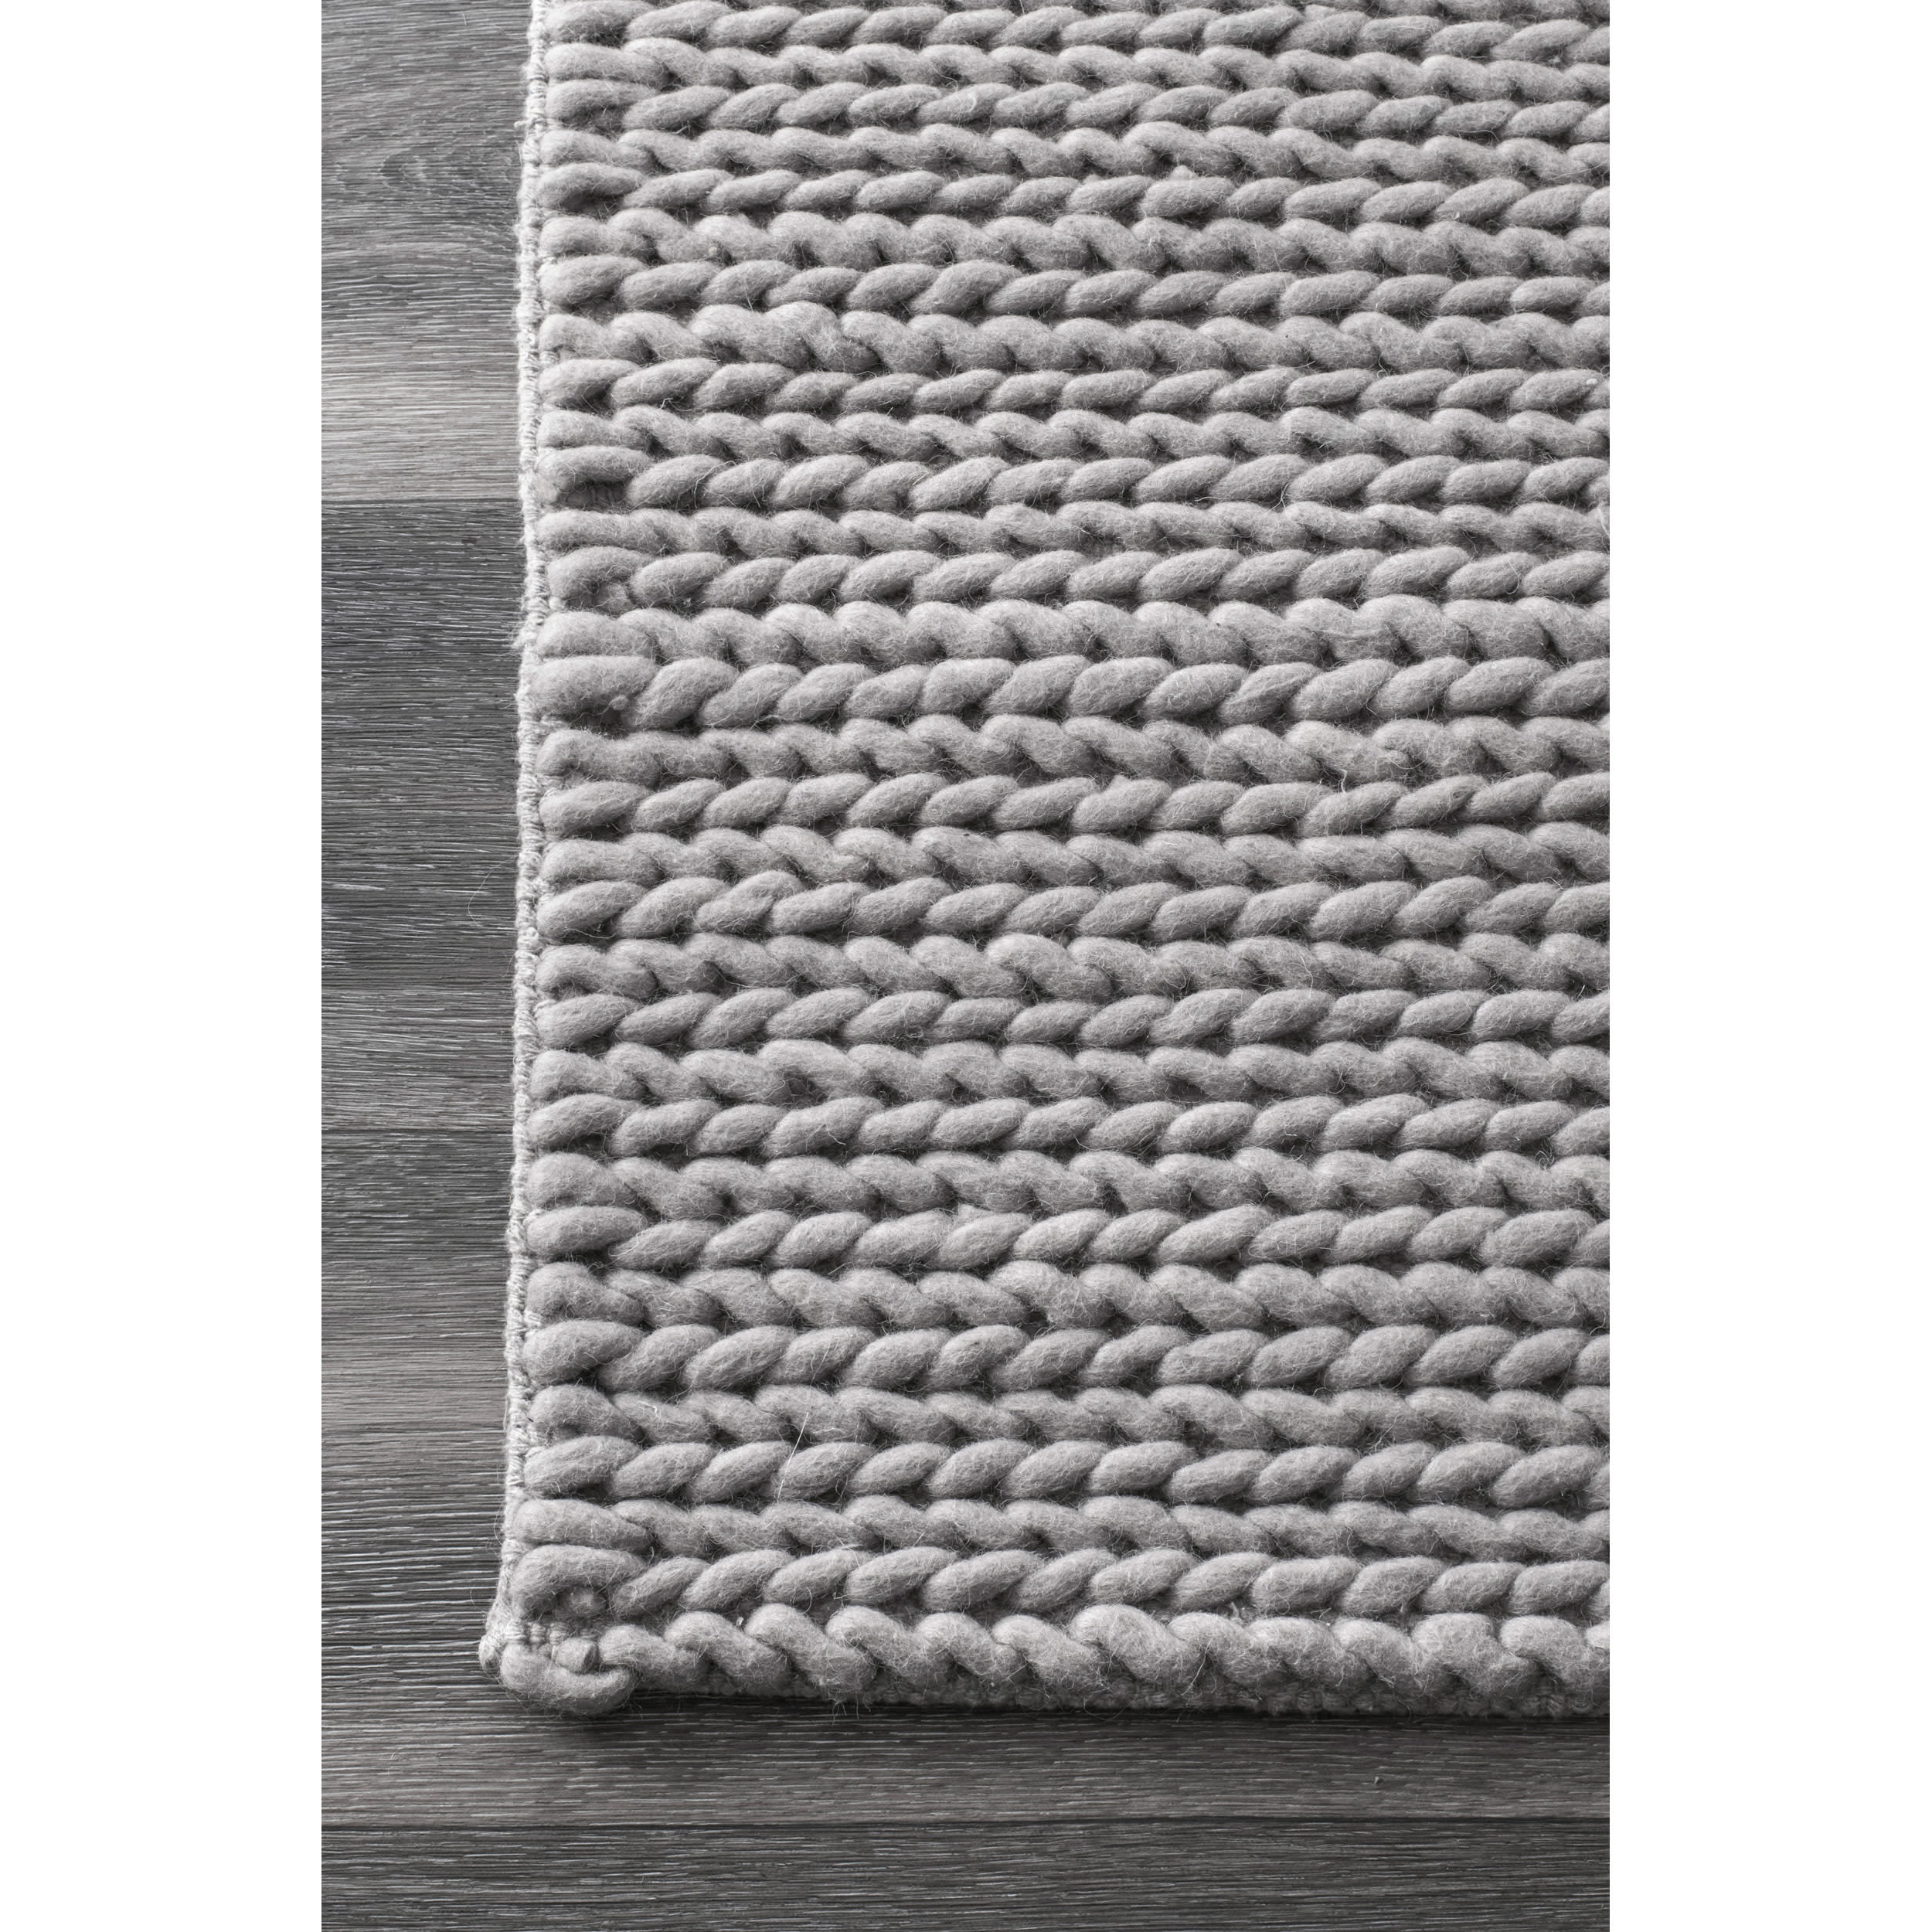 2'9 x 3'4 Heart Wool Braided Rug - Hand laced & pet friendly!